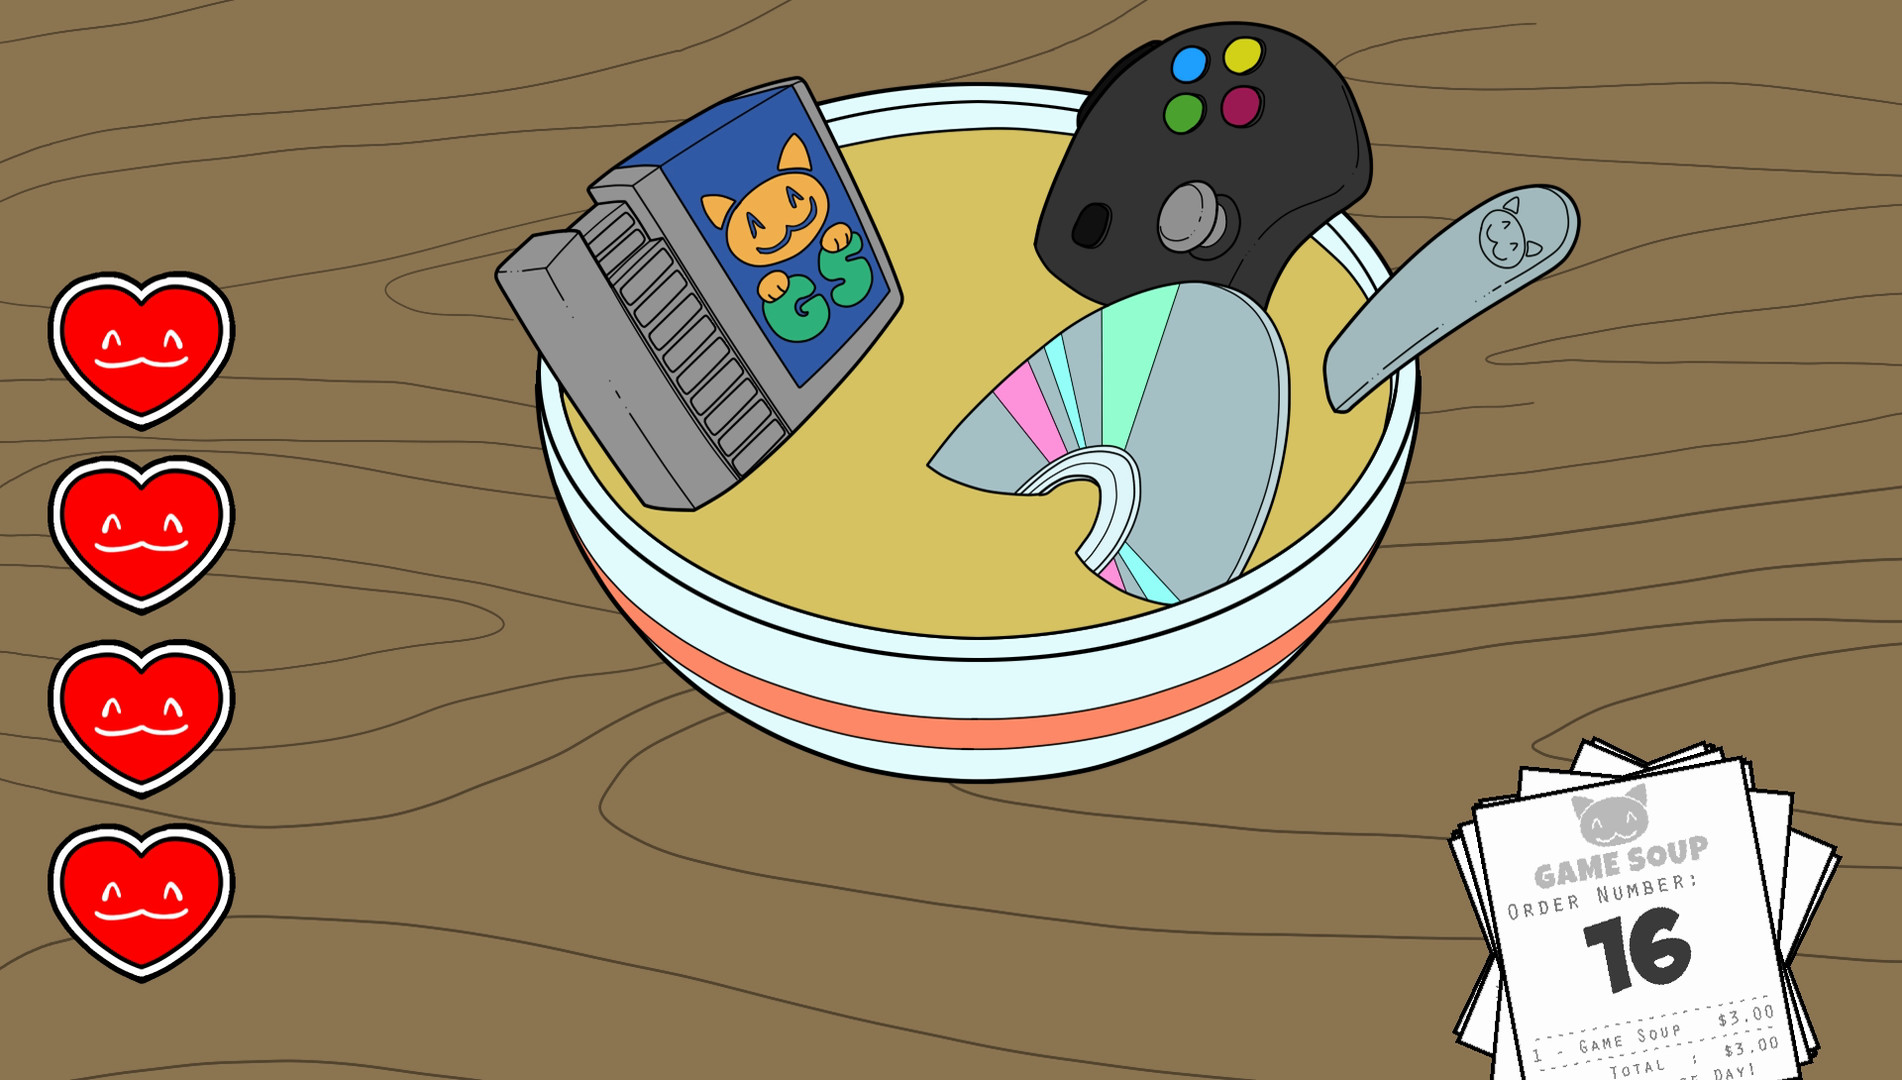 Game Soup.